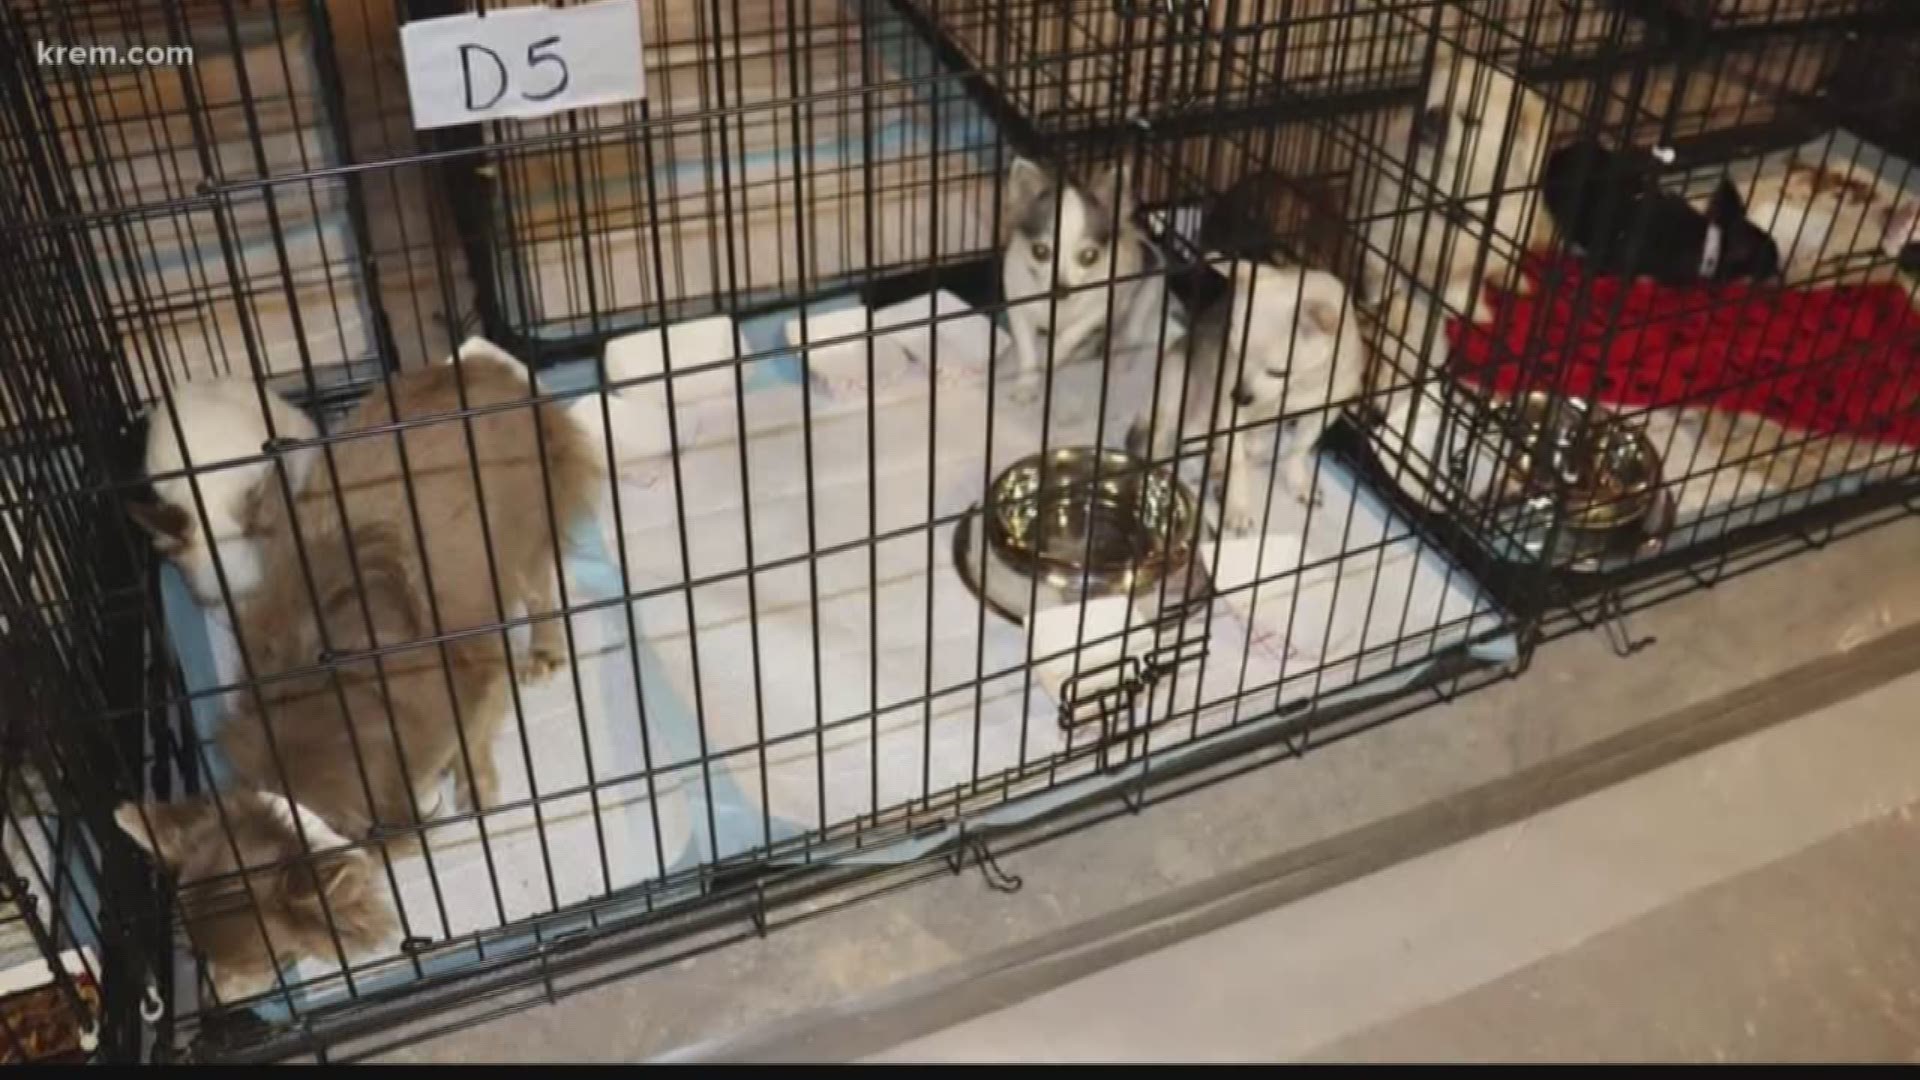 It was last week when authorities in Stevens County announced that they had busted two separate illegal puppy mills, seizing more 250 dogs in the process. The dogs were taken from homes in the Suncrest and Ford areas.